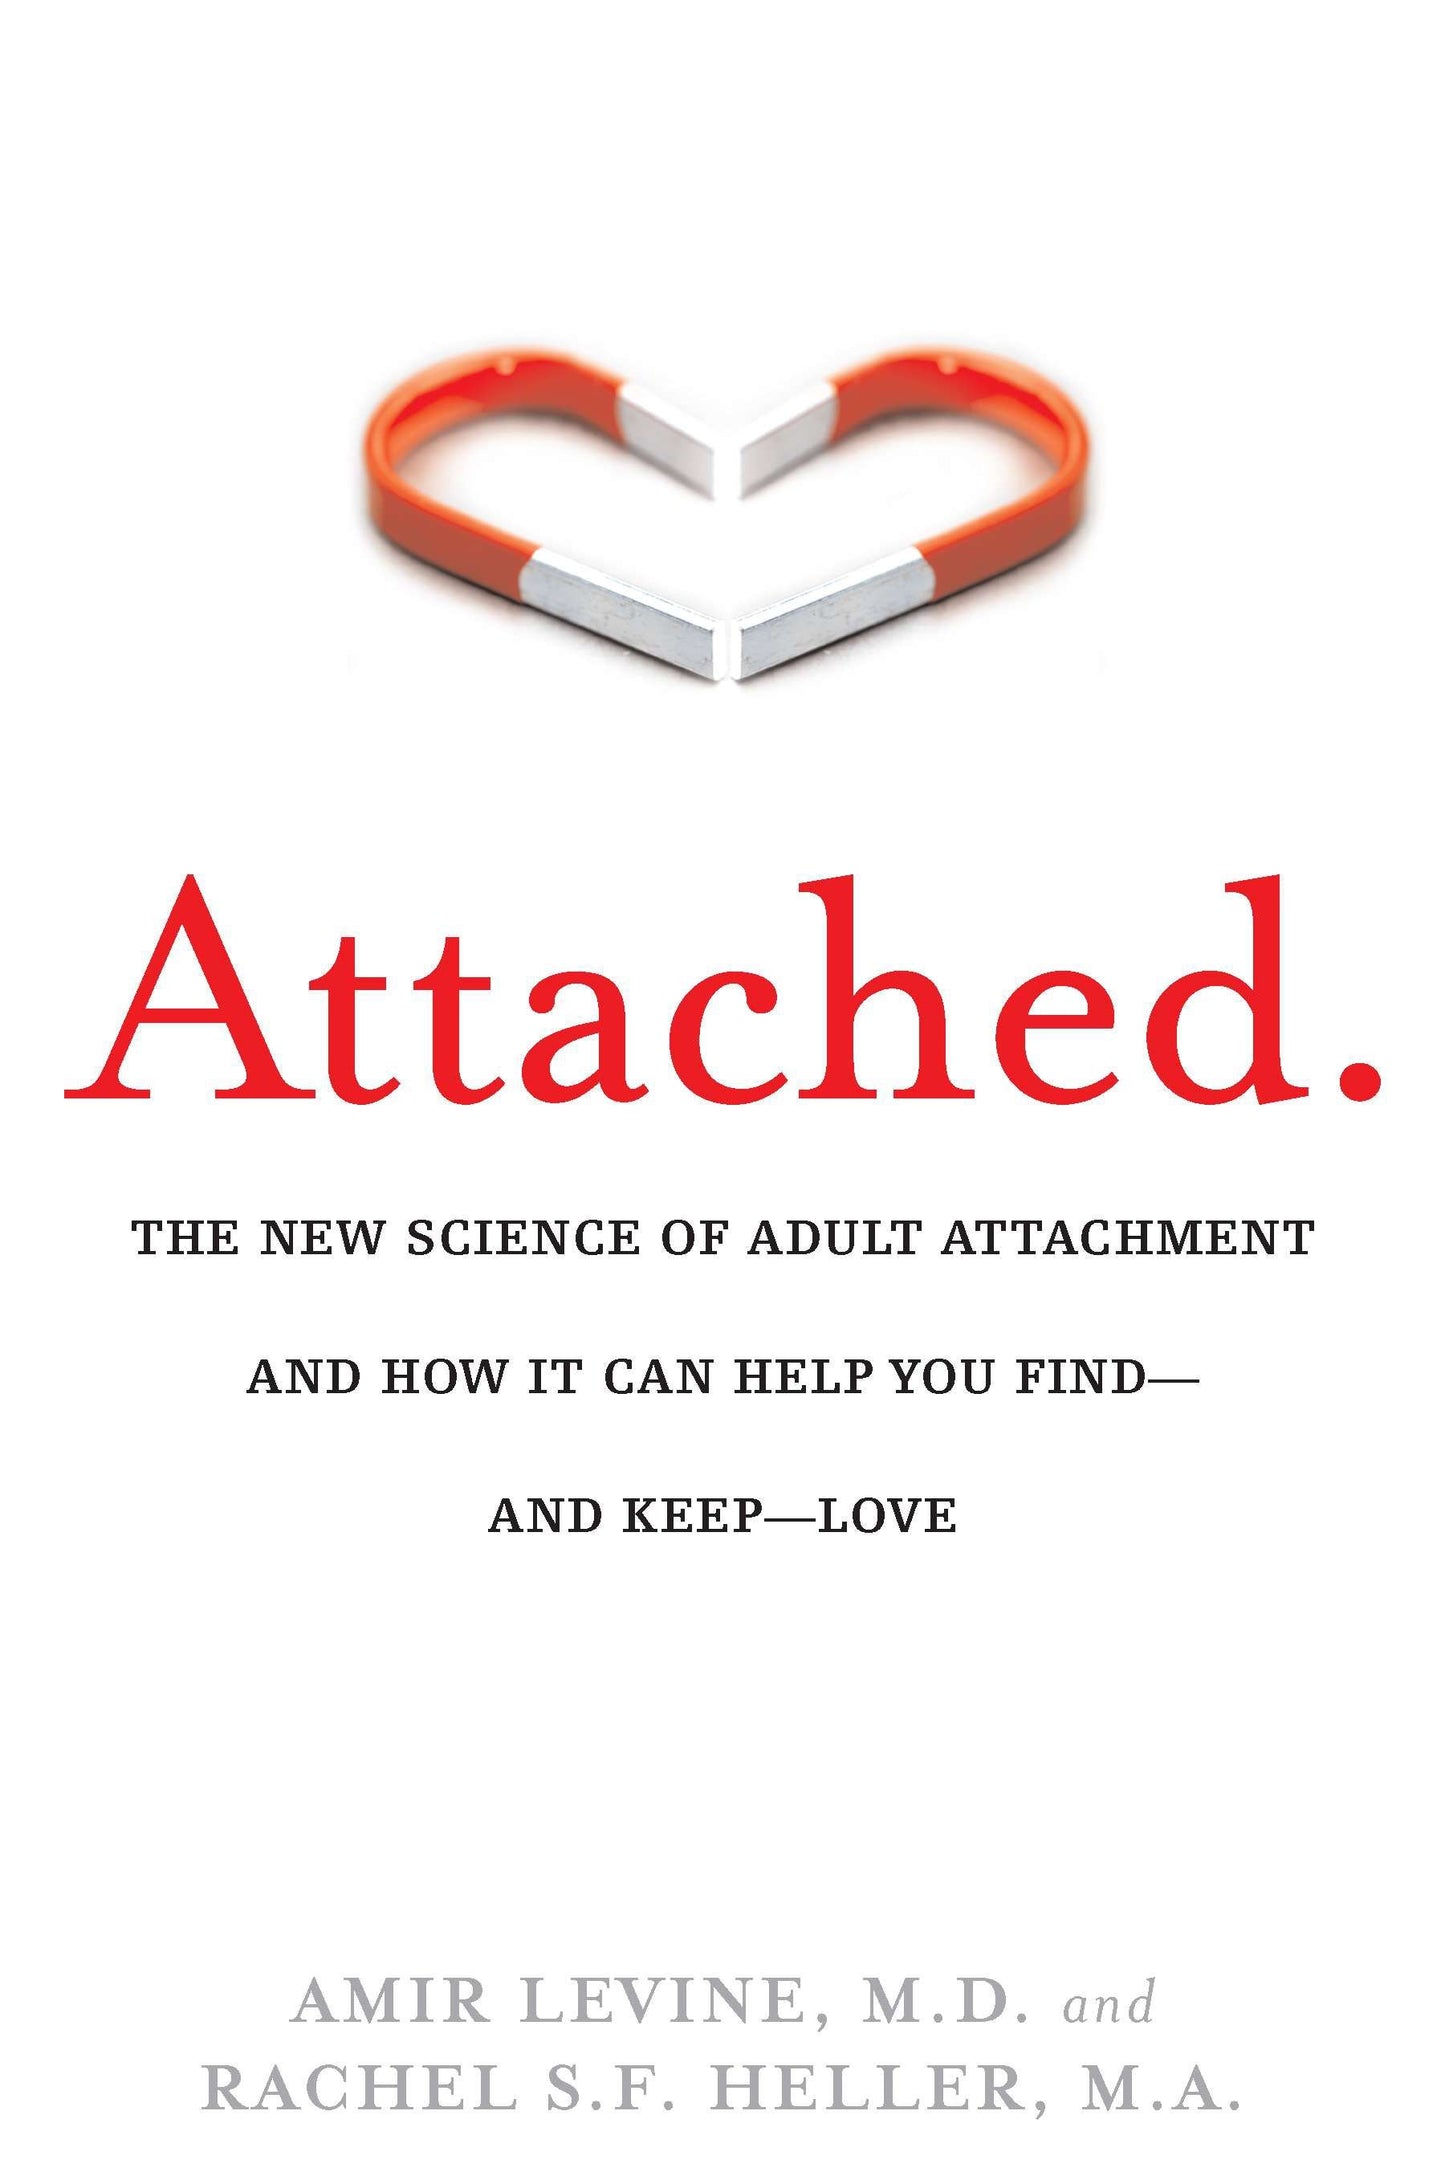 Attached // The New Science of Adult Attachment and How It Can Help You Find--And Keep--Love